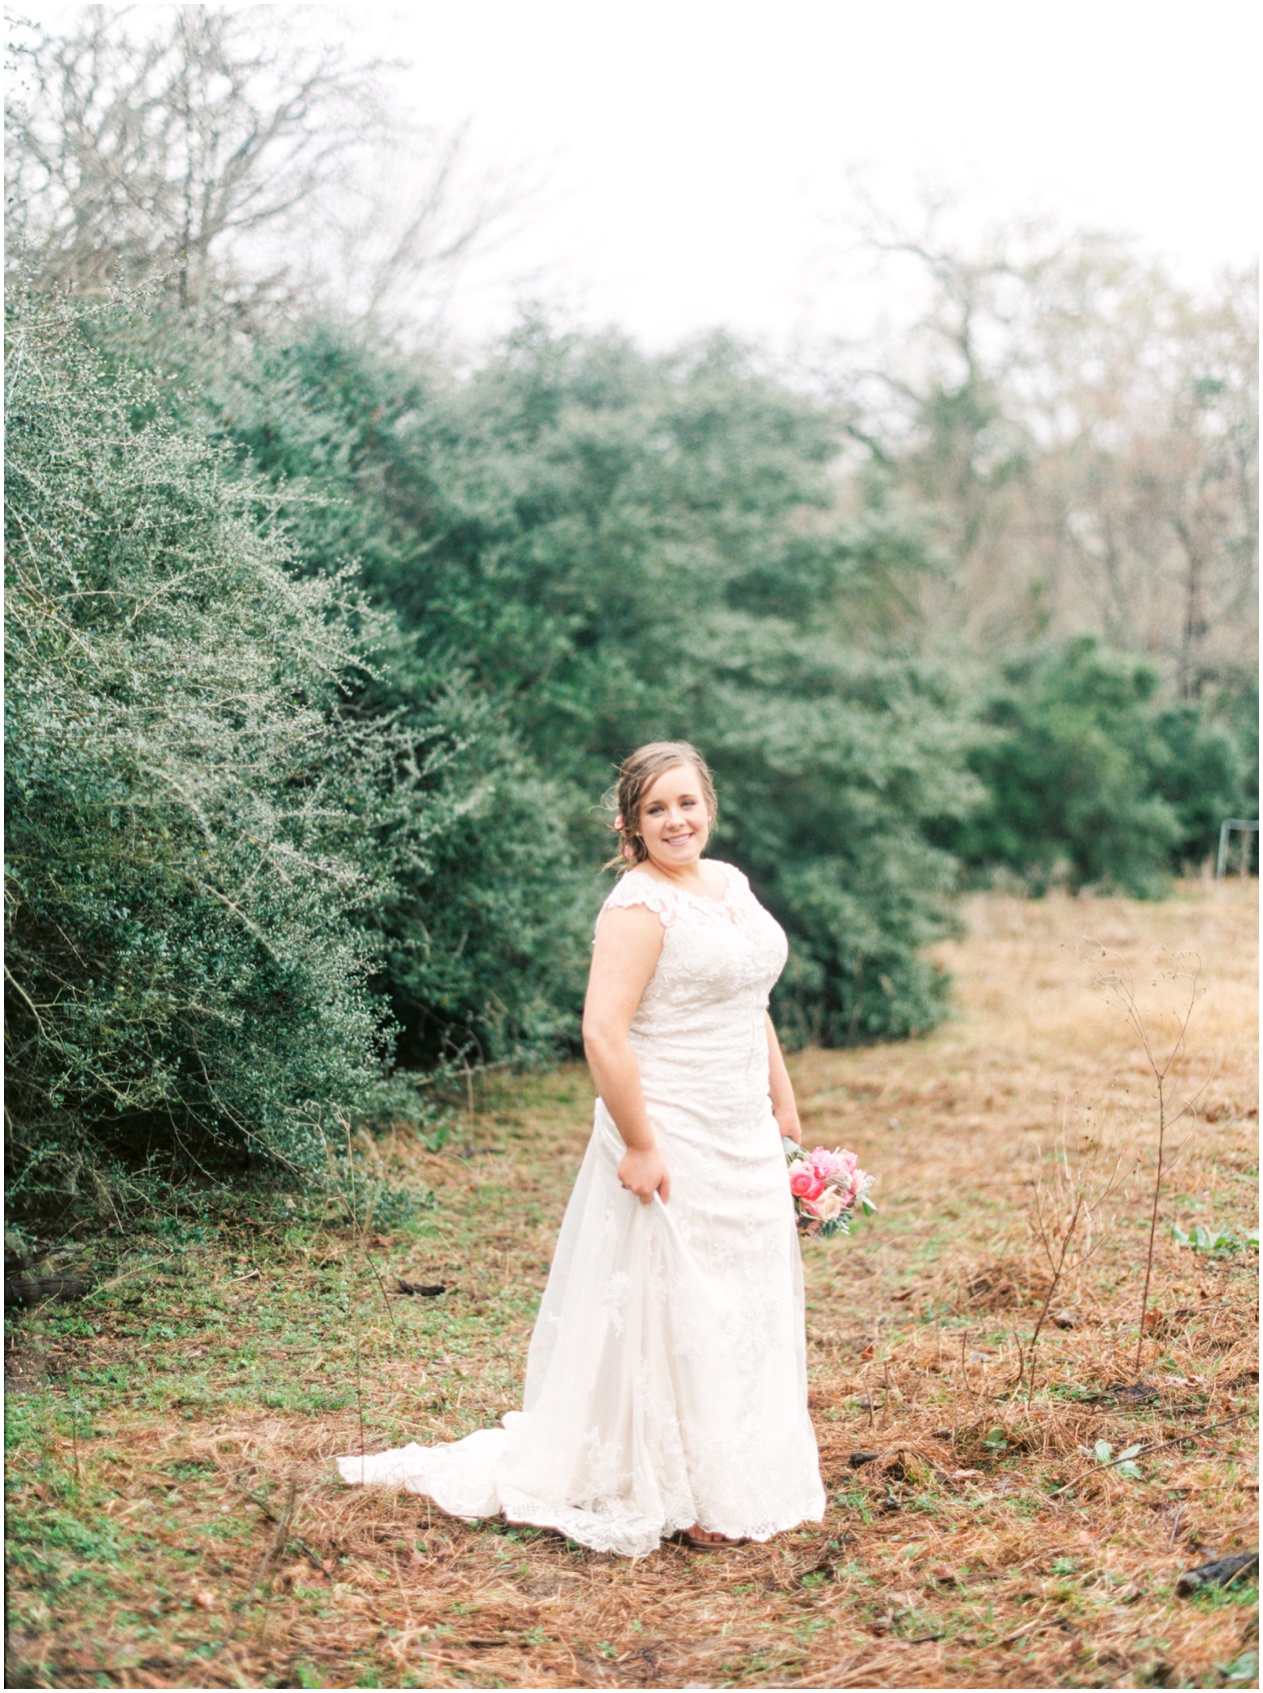 Sarah Best Photography - Claire's Bridals - The Amish Barn at Edge-35_STP.jpg